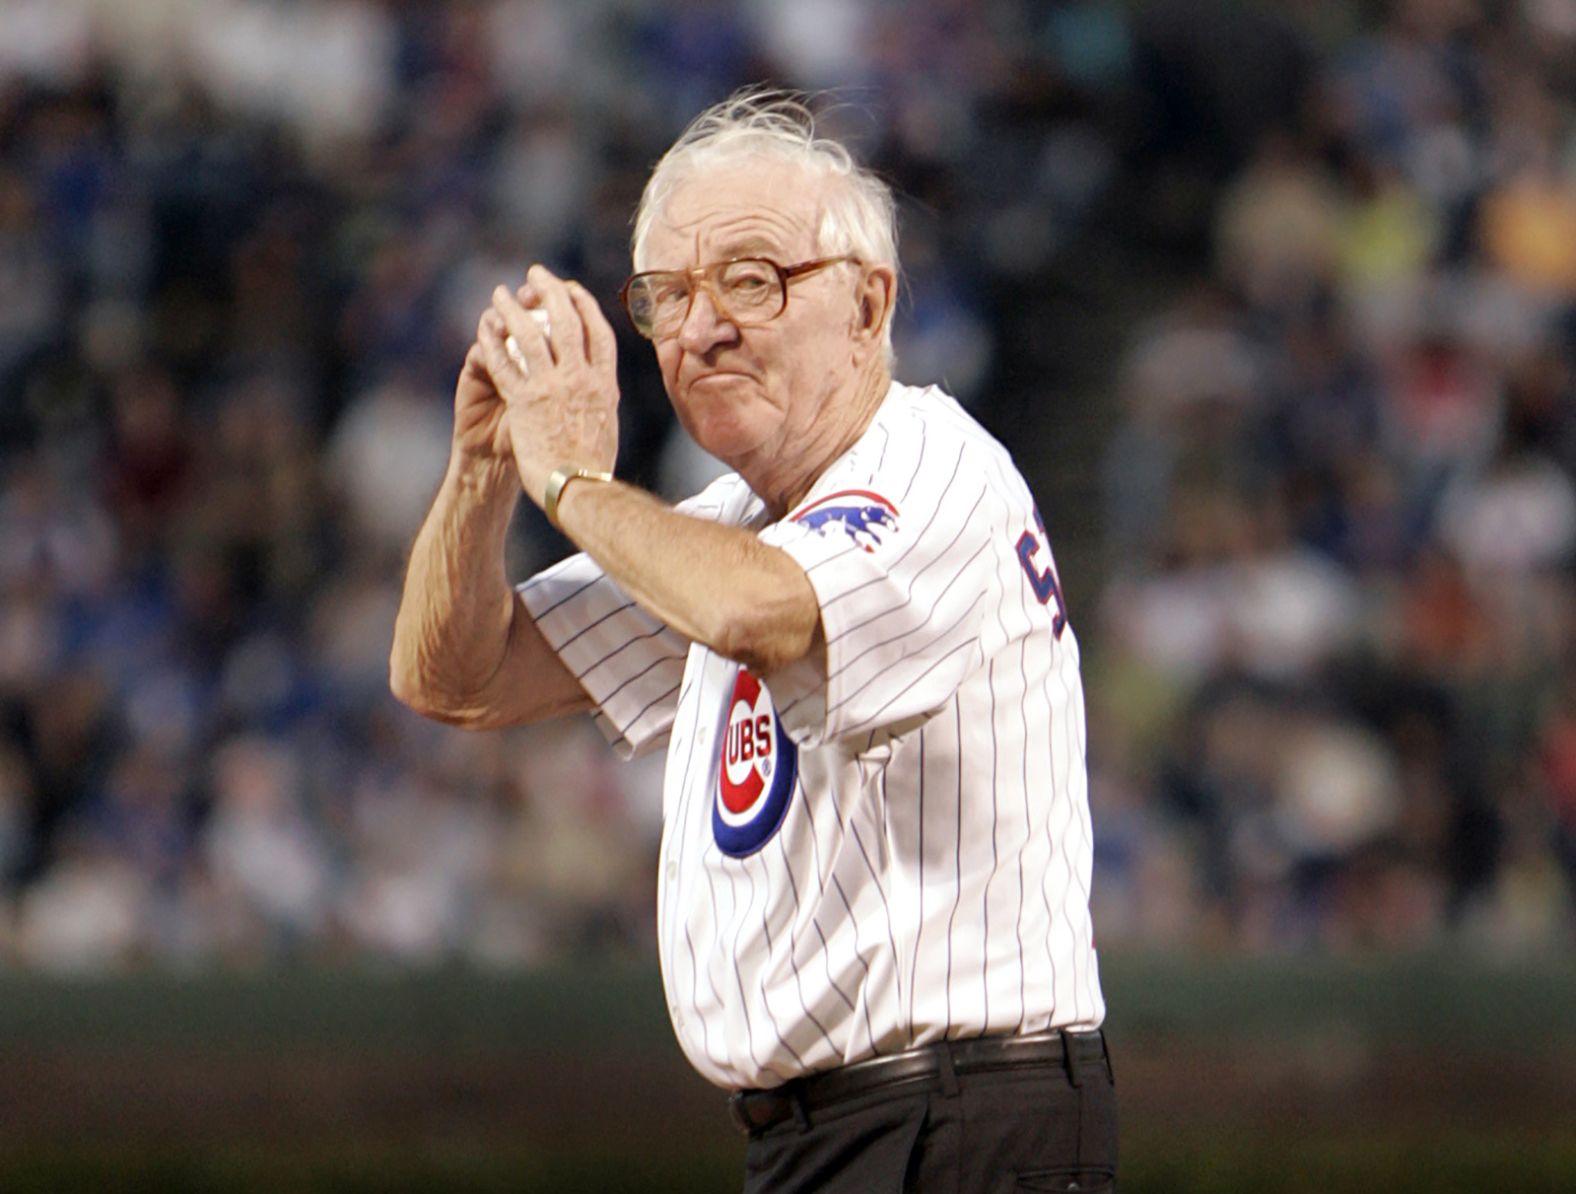 Stevens winds up to throw out the first pitch before the start of the Chicago Cubs game against the Cincinnati Reds at Wrigley Field in Chicago on September 14, 2005. Stevens rooted for the Chicago Cubs his whole life. 